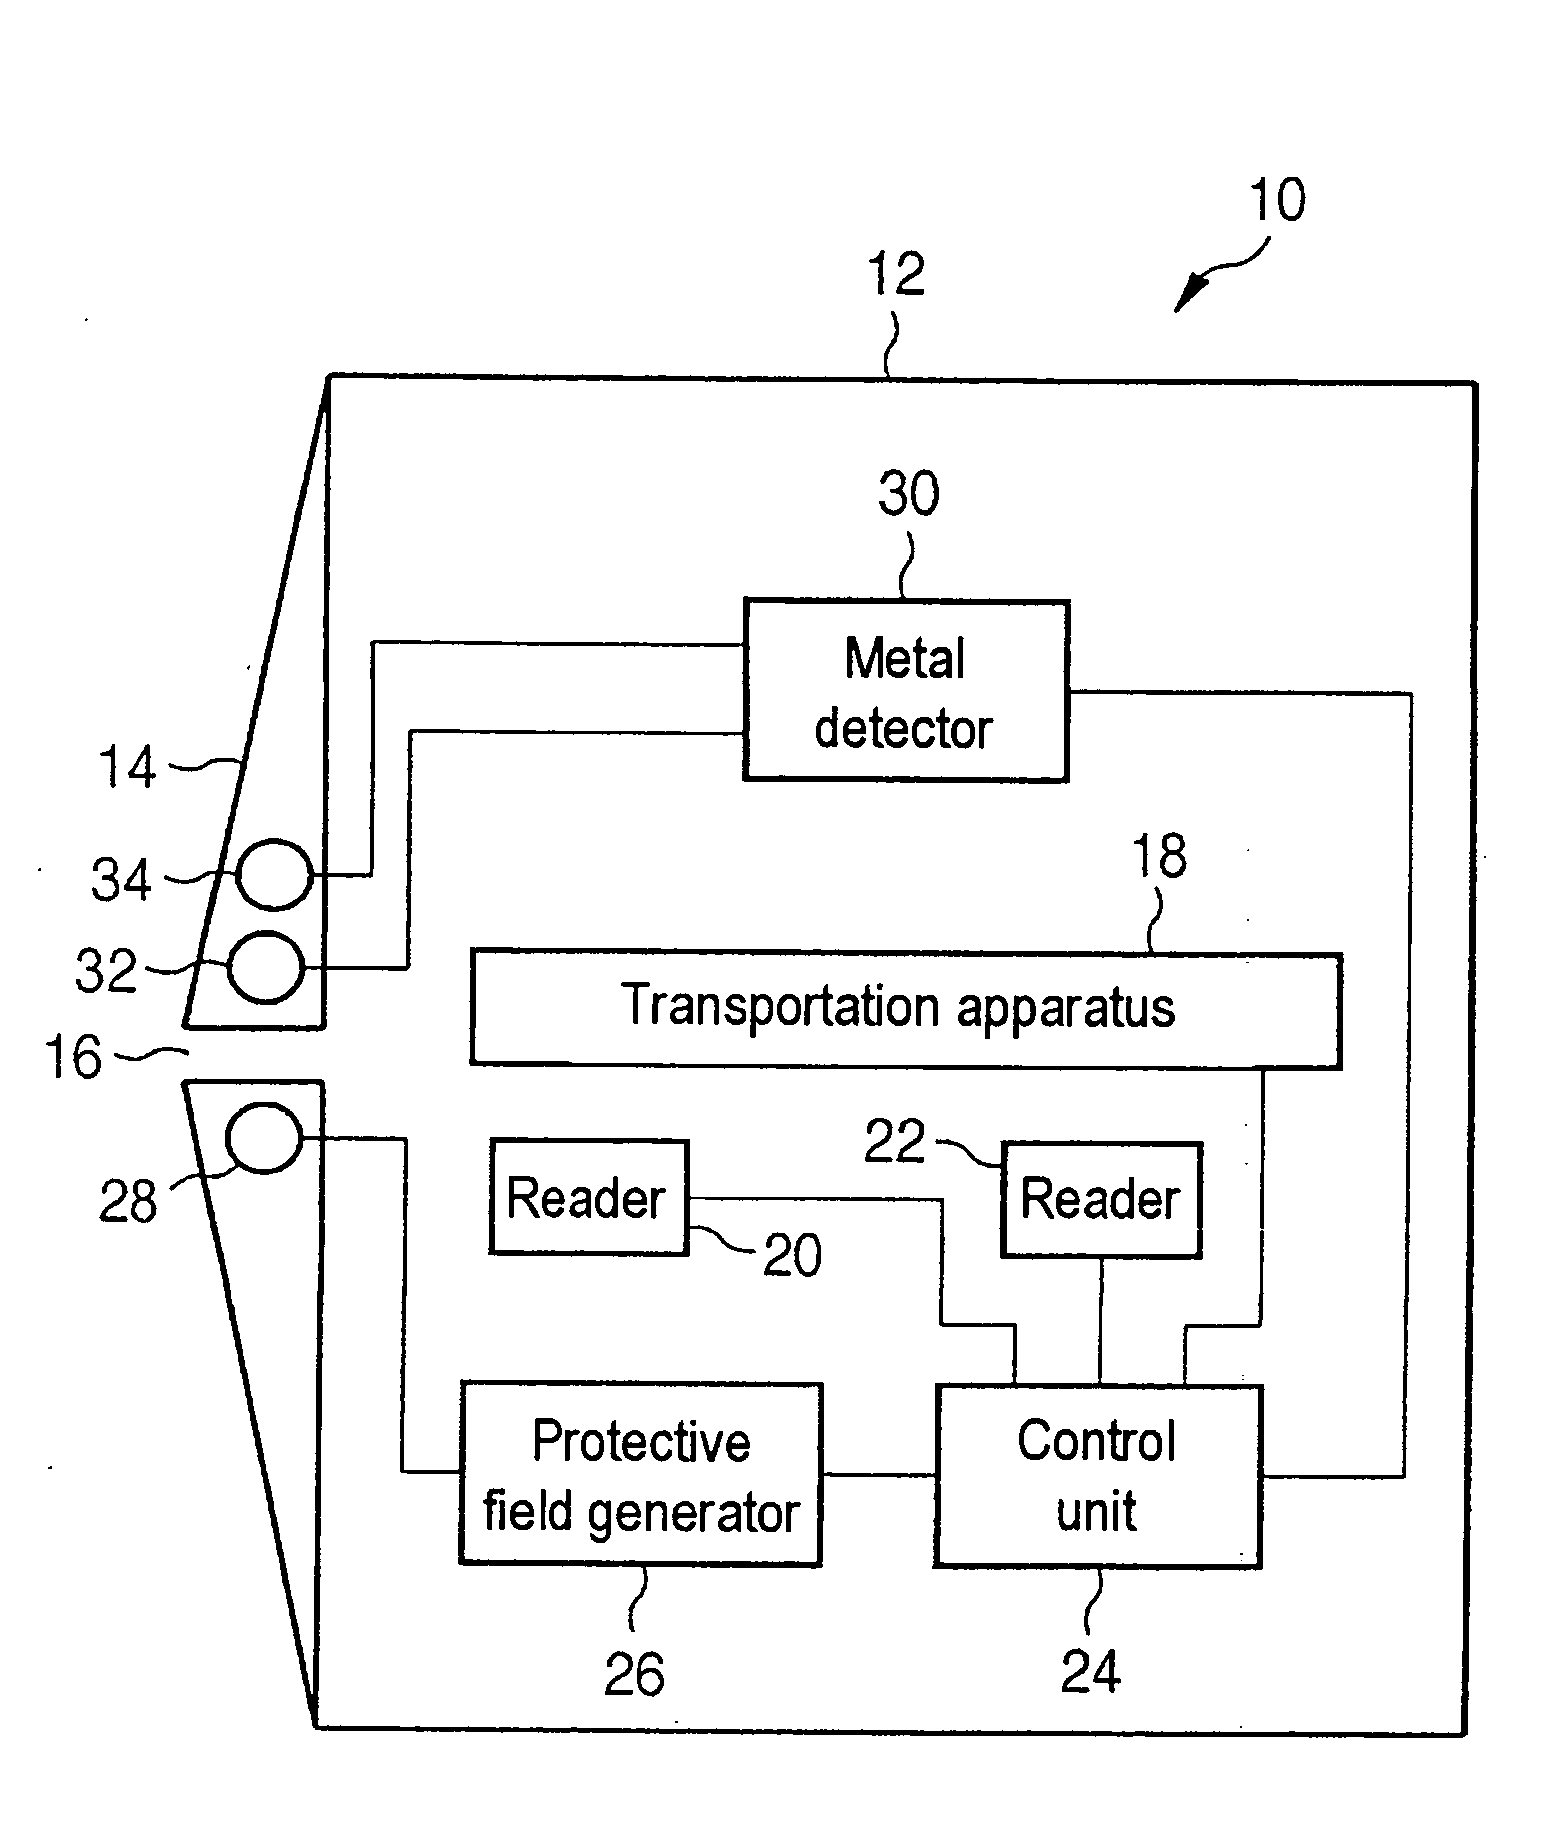 Method for generating a protective electromagnetic field for a card reading device